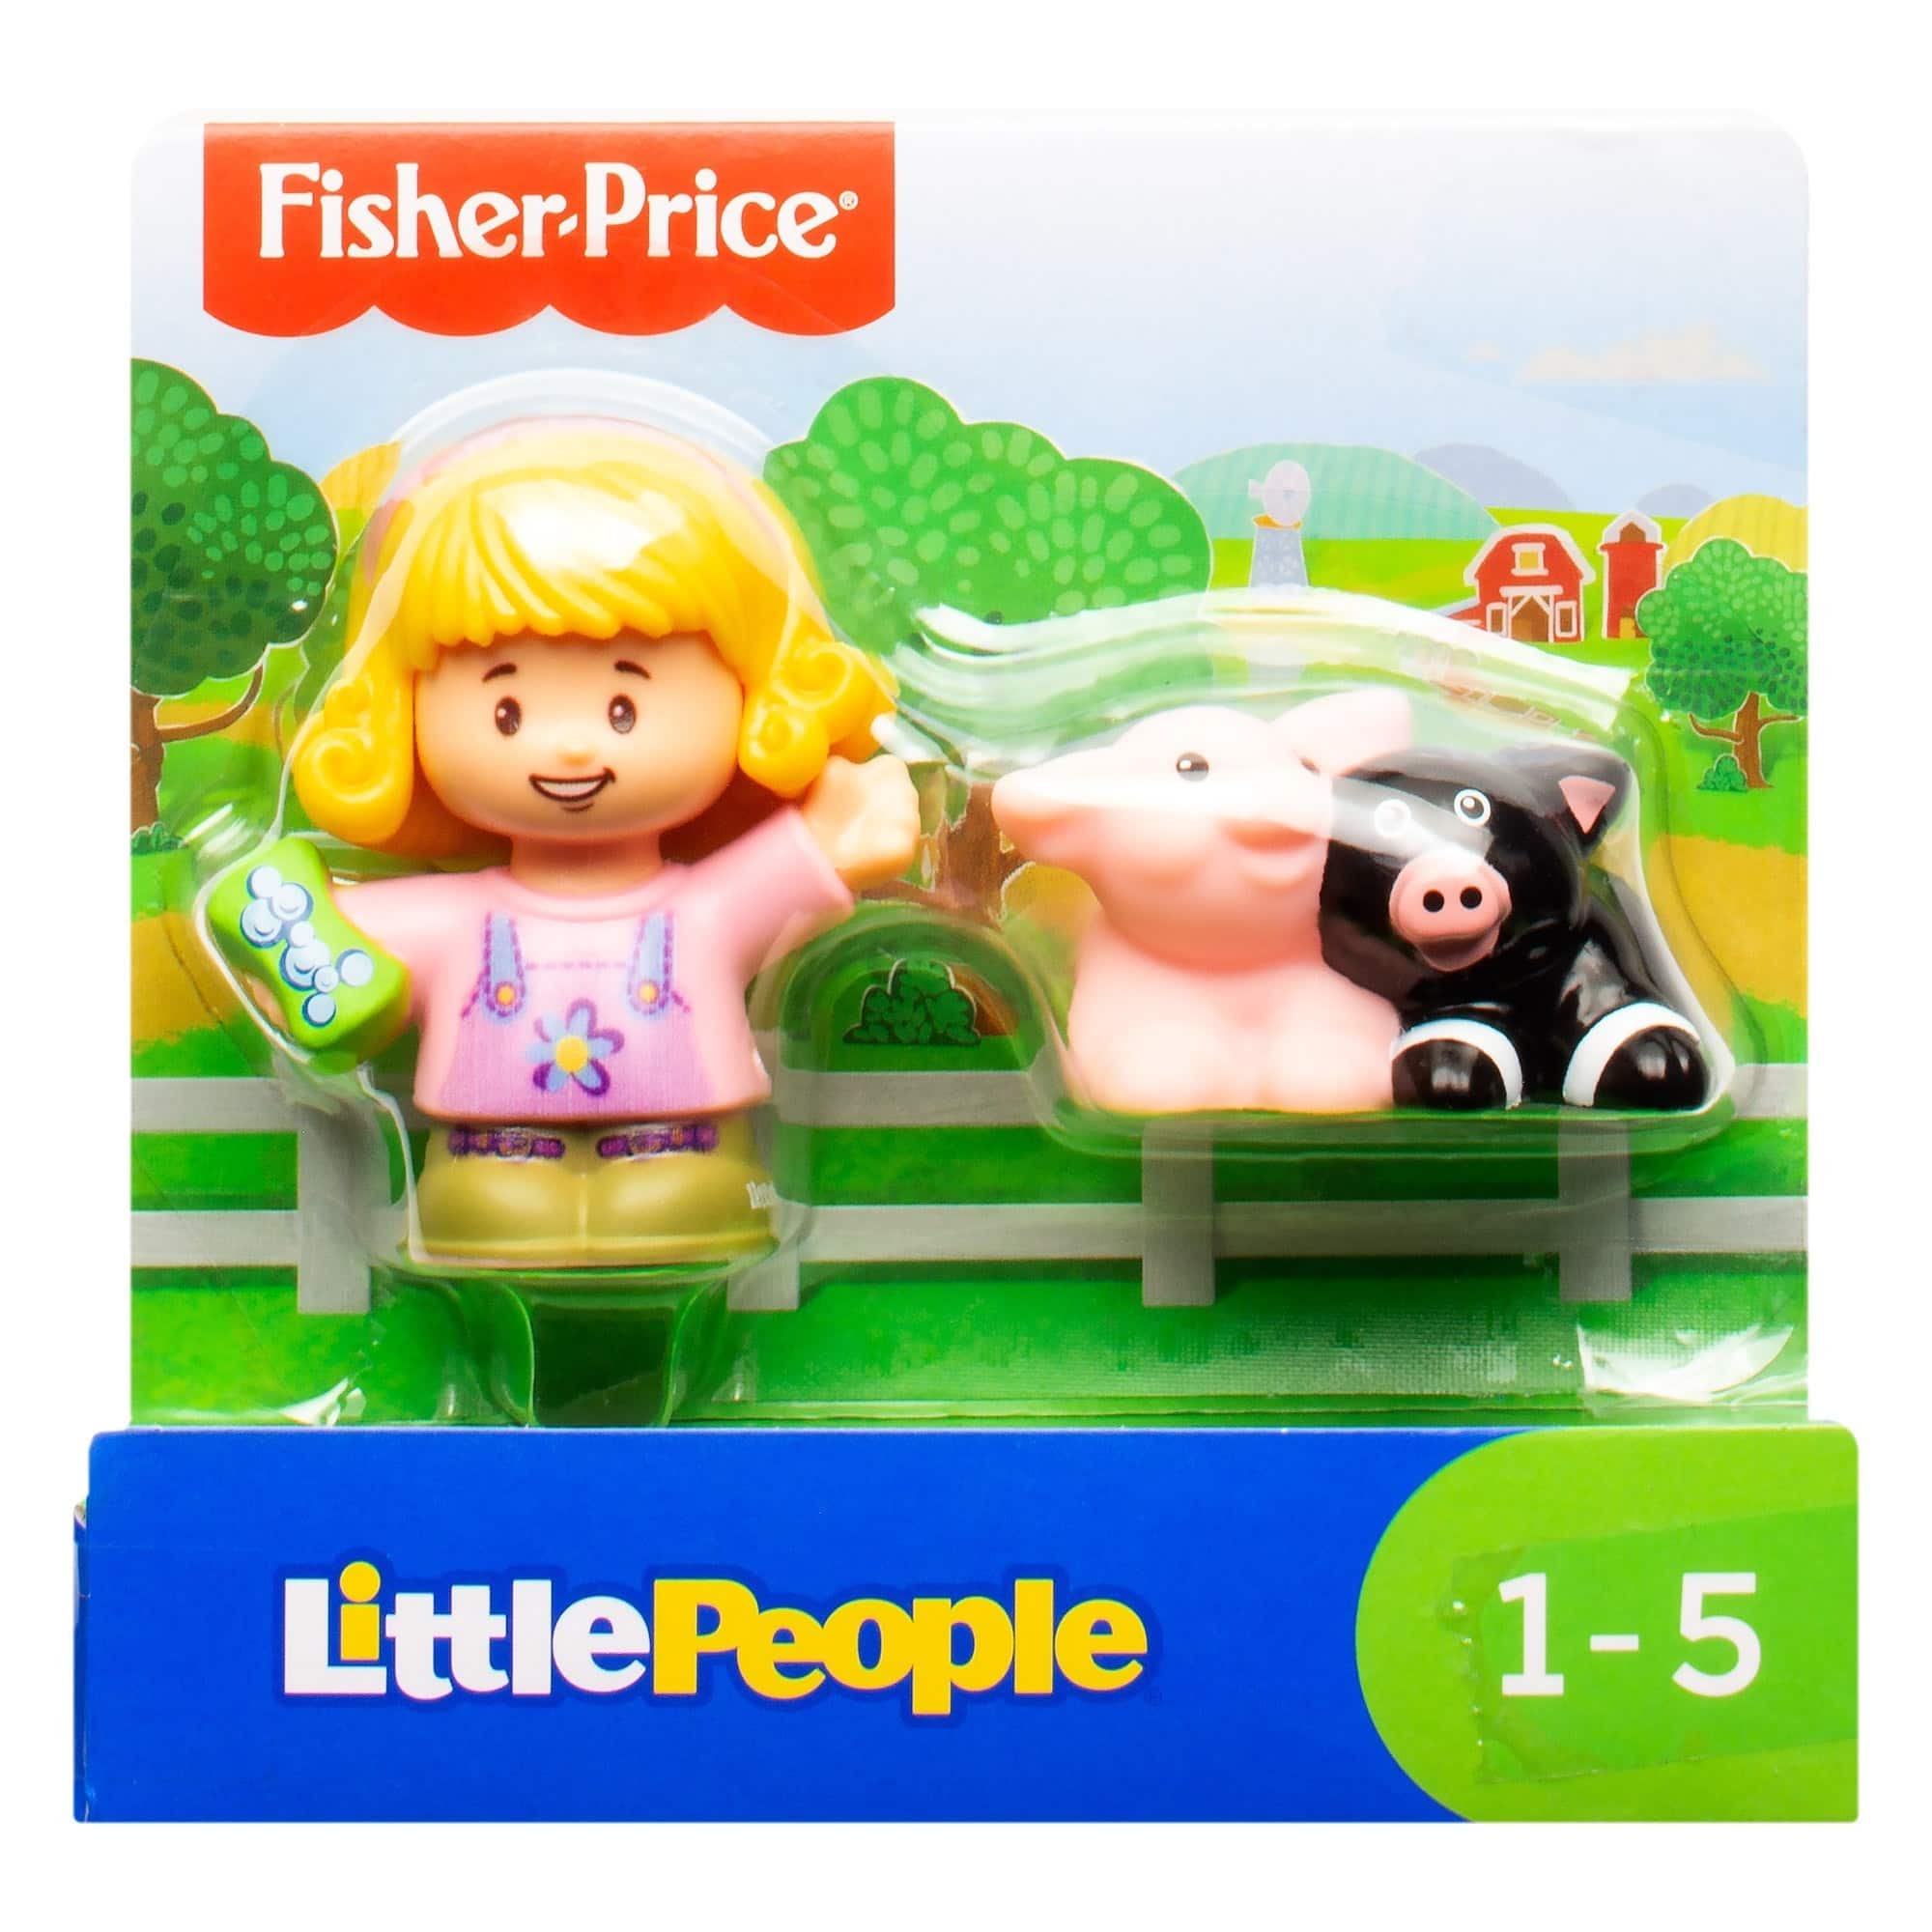 Fisher Price - Little People Figures - Emma and Piglets